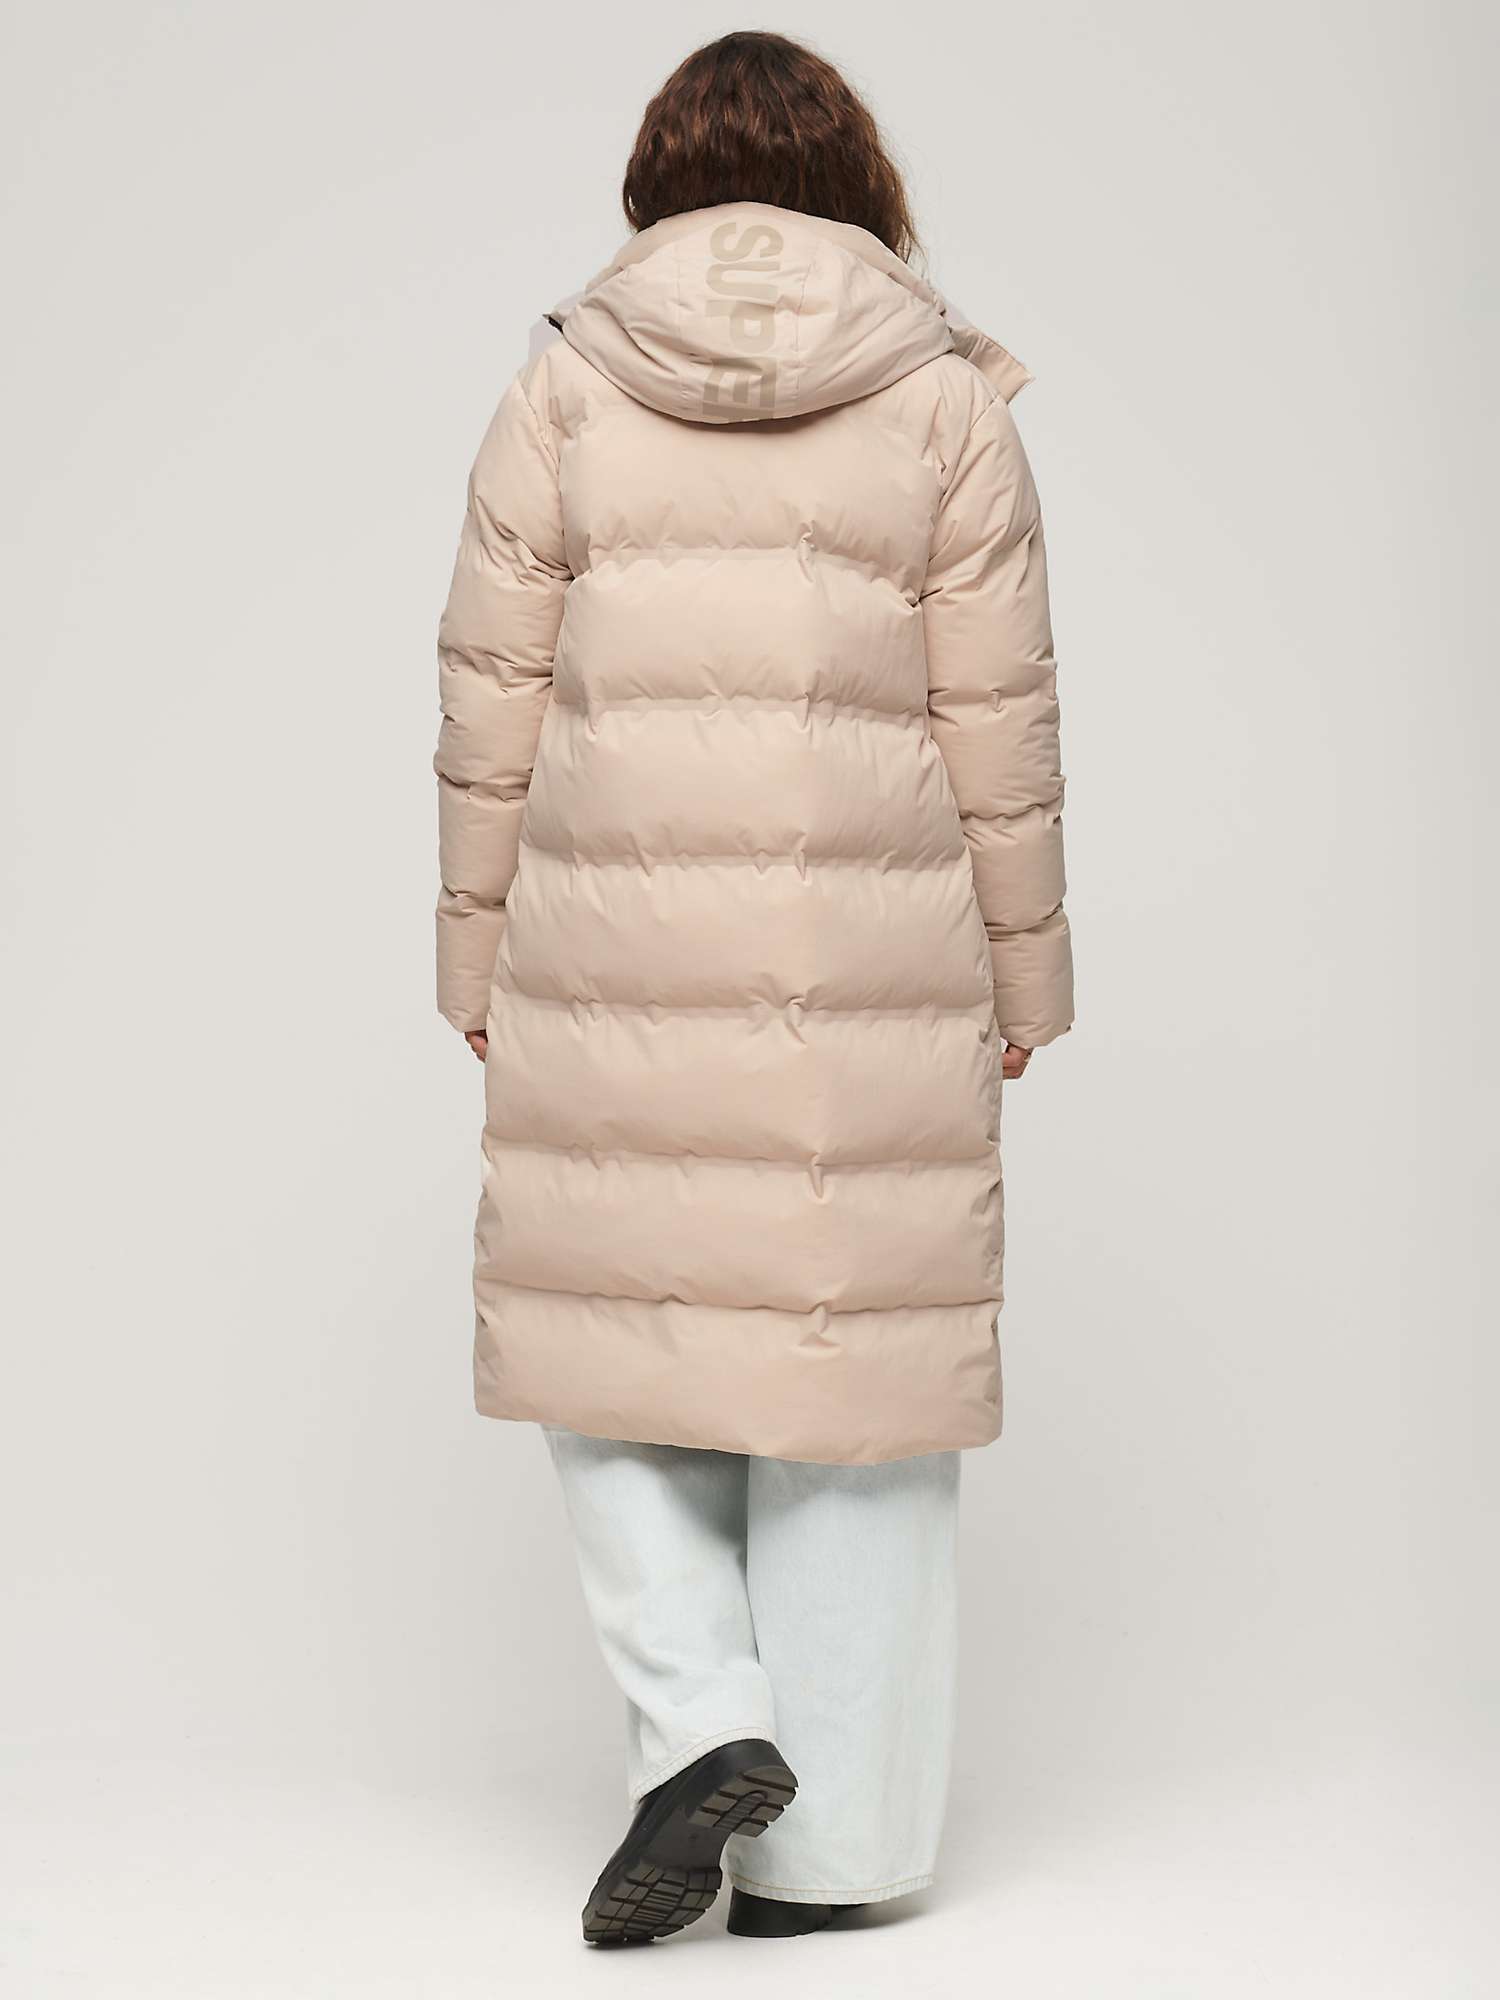 Superdry Hooded Longline Puffer Coat, Chateau Gray at John Lewis & Partners